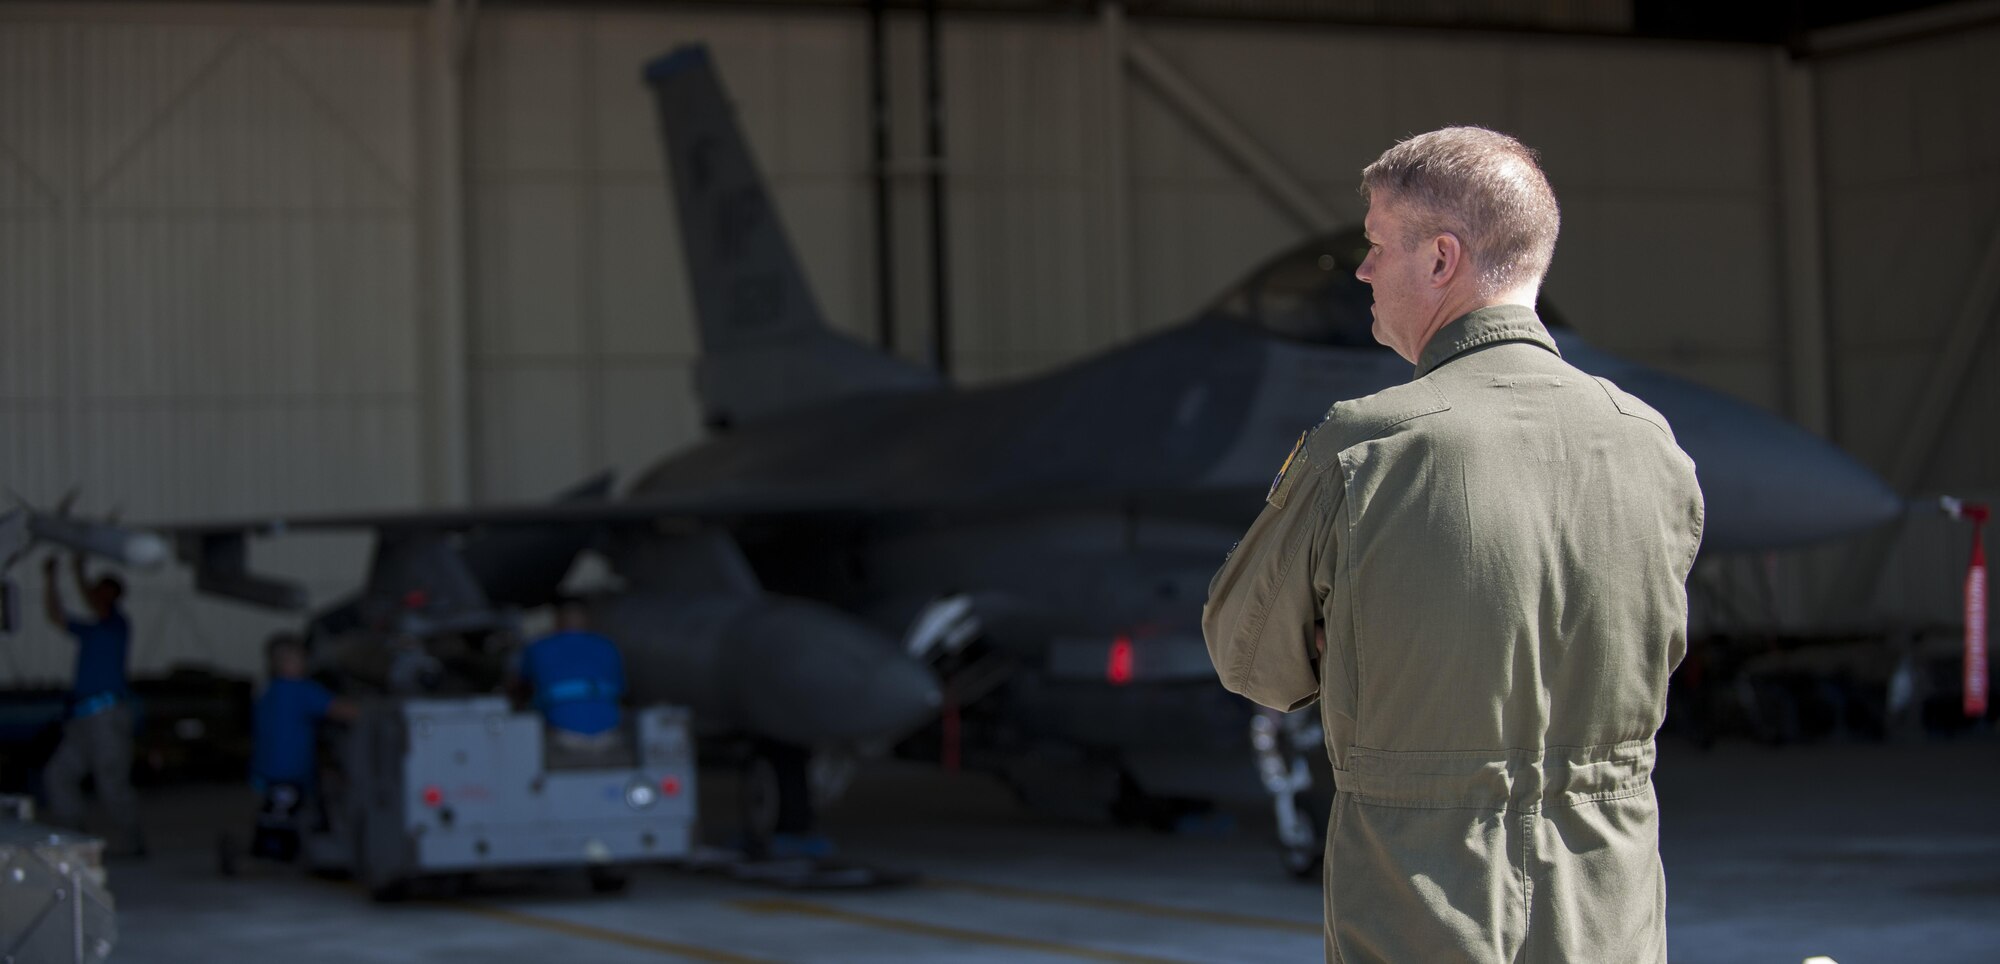 U.S. Air Force Col. David G. Shoemaker, “Wolf”, 8th Fighter Wing commander, surveys a weapons load competition at Kunsan Air Base, Republic of Korea, Oct. 20, 2017. The Wisconsin Air National Guard 115th Fighter Wing, along with the 80th Aircraft Maintenance Unit and the 35th Aircraft Maintenance Unit competed in a weapons load competition for the first time during the 115th FW’s theater security package deployment to the Wolf Pack. (U.S. Air Force photo by Staff Sgt. Victoria H. Taylor)